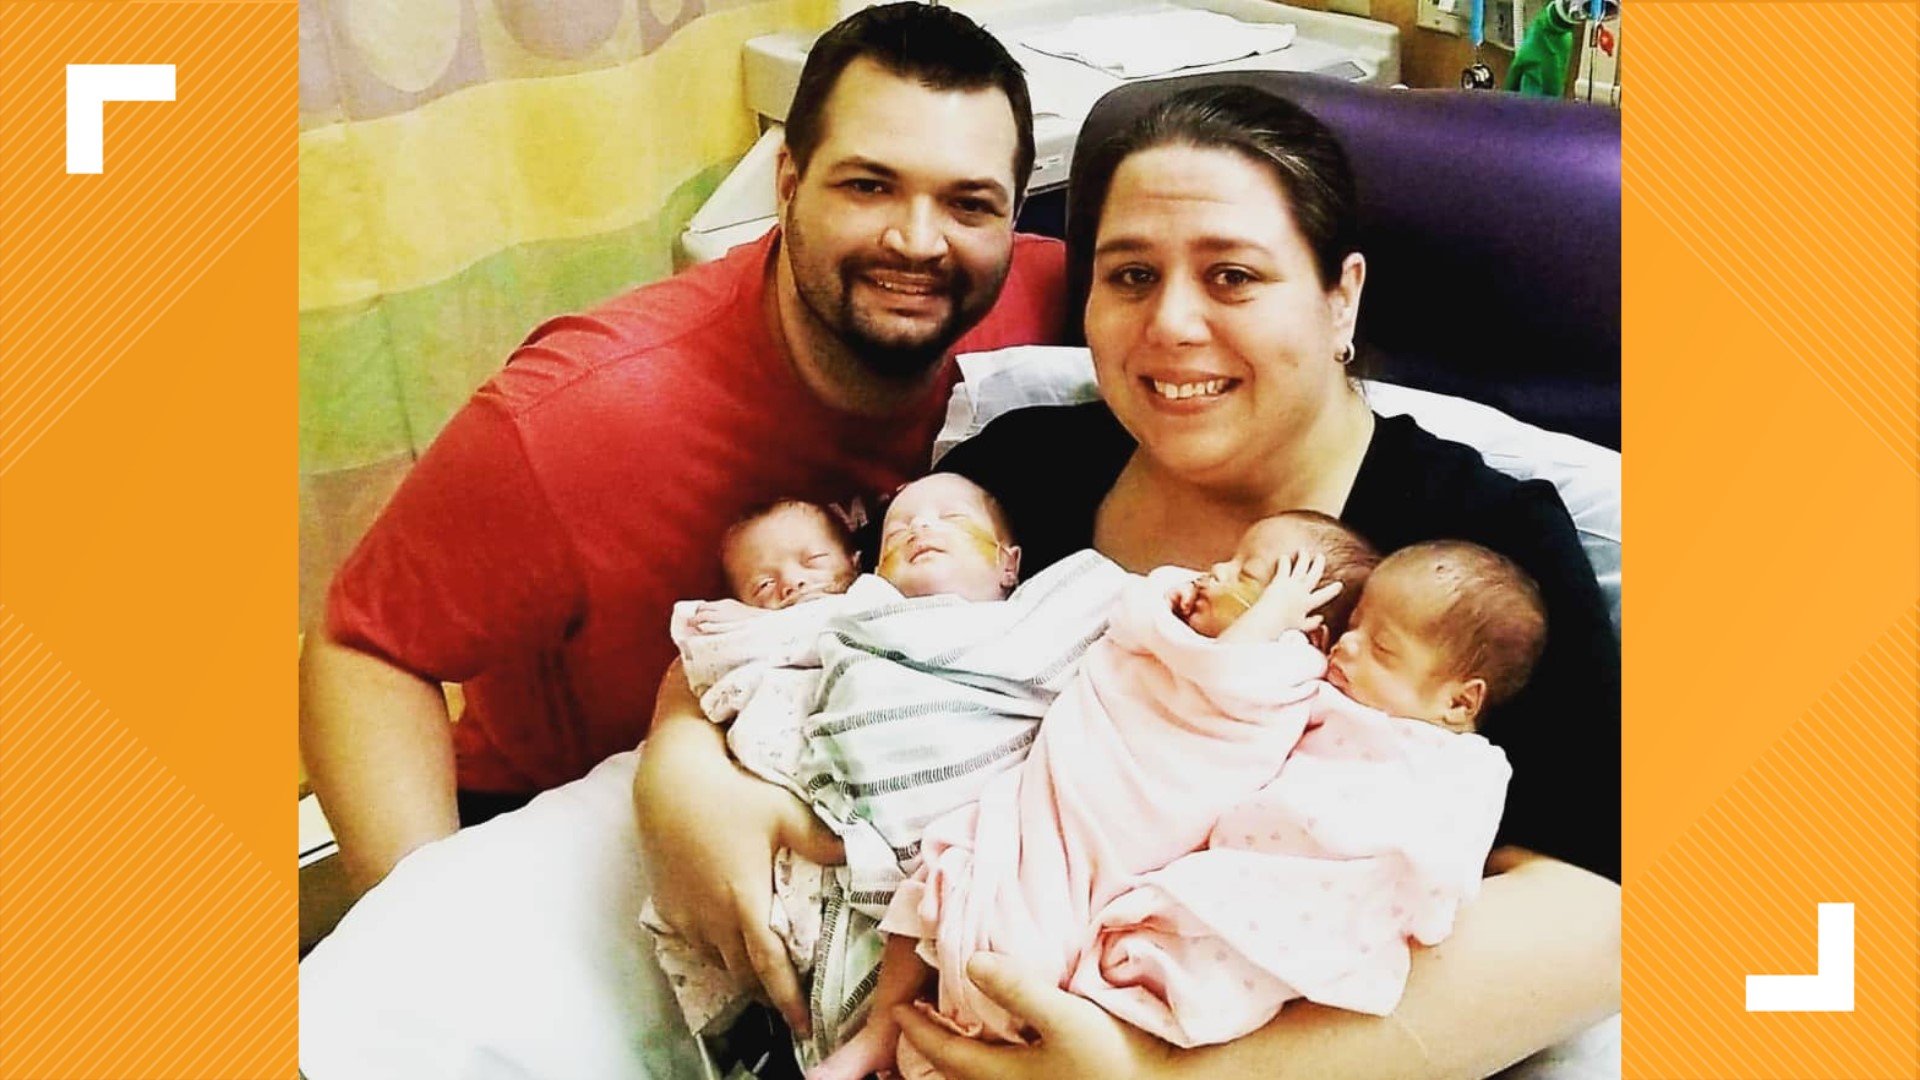 Jennifer and Nicholas Stepenosky welcomed three girls and a boy into the world at Banner University in Phoenix. They're getting ready to go back home to New Jersey.